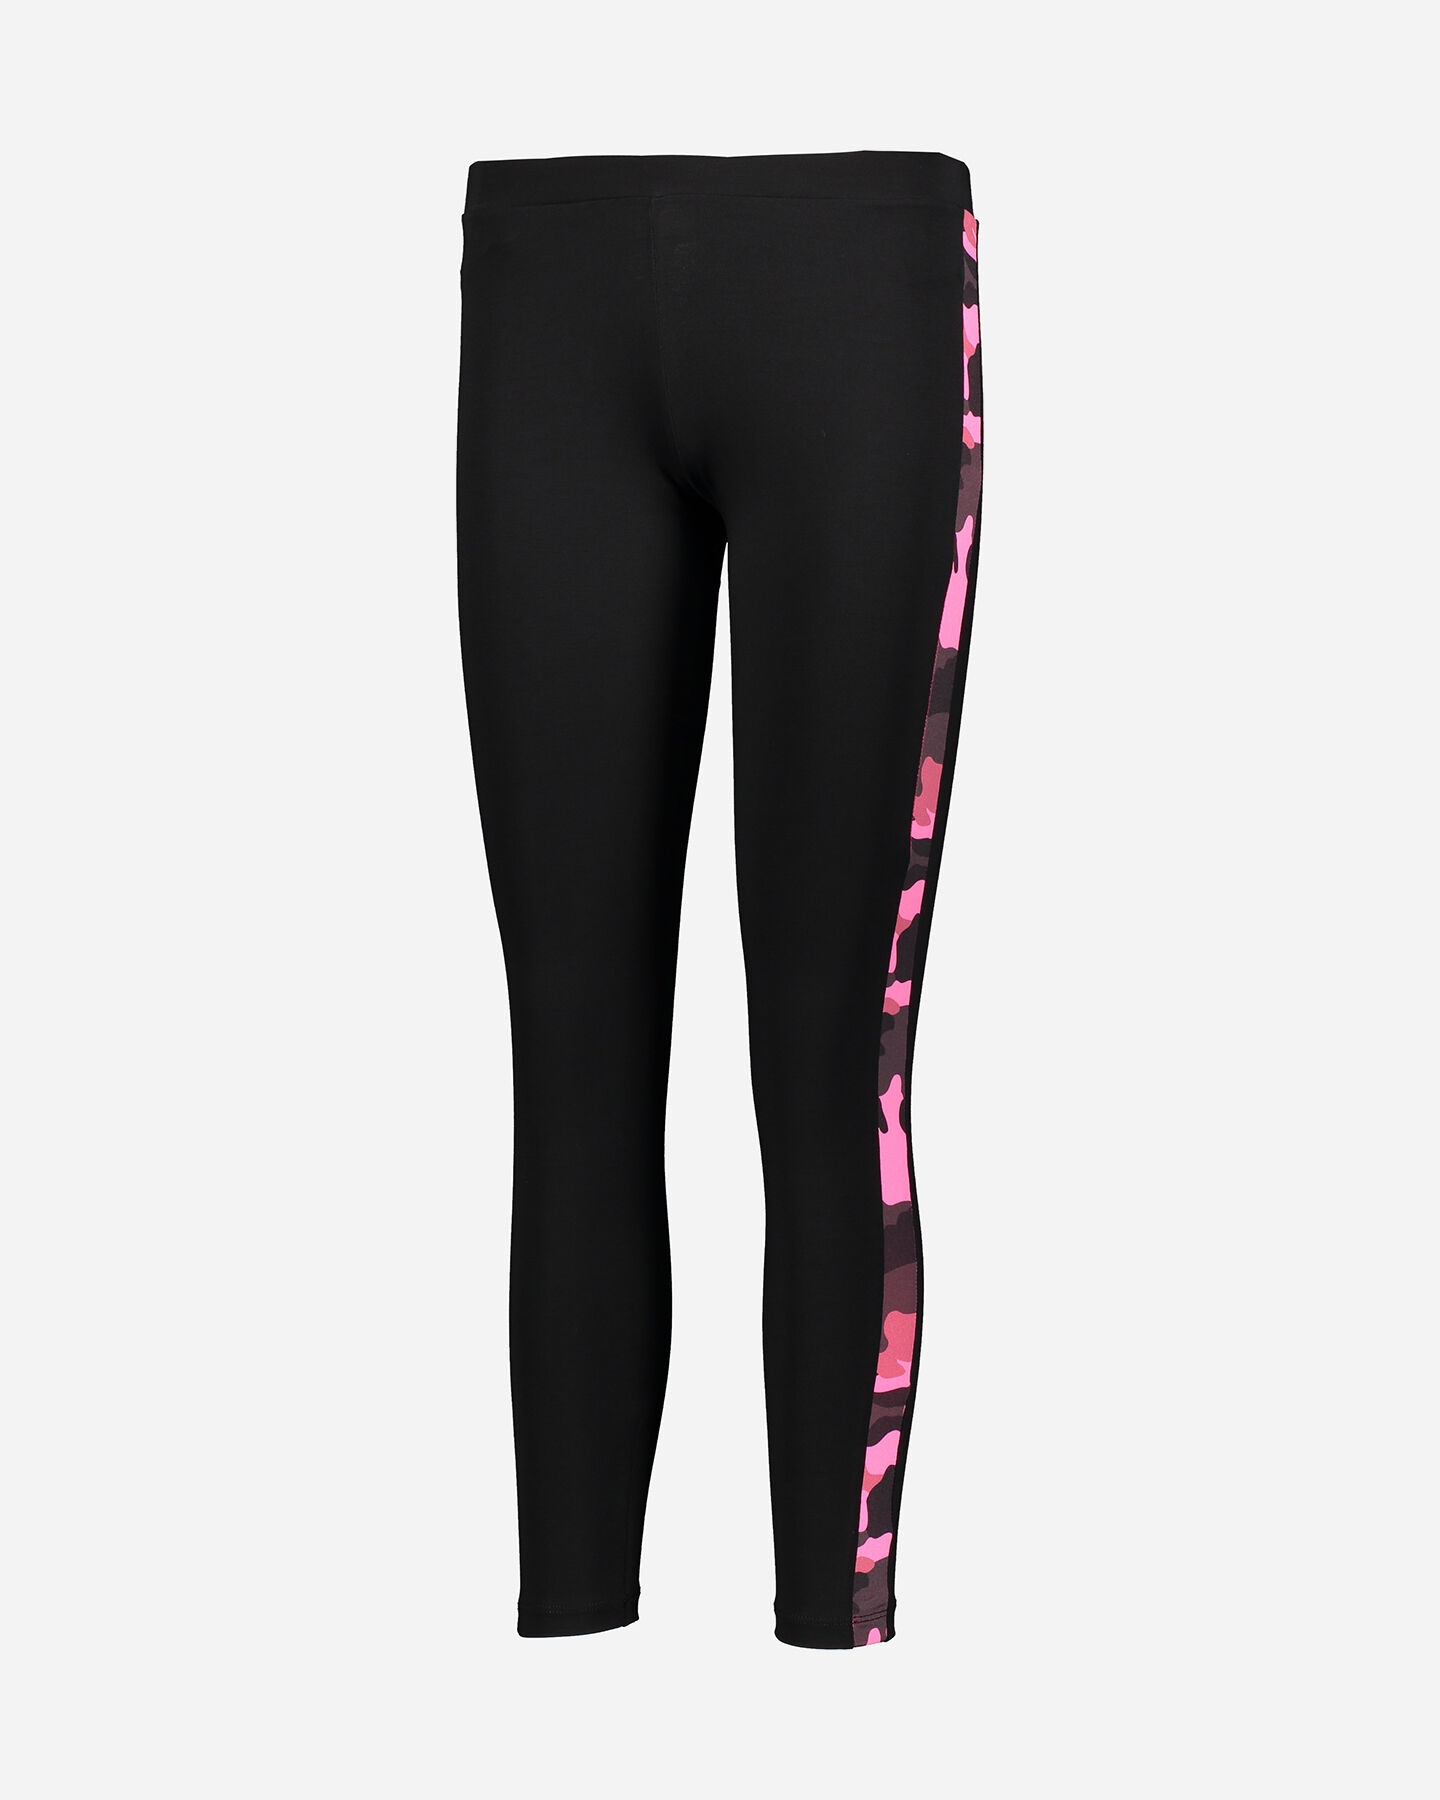  Leggings FREDDY JSTRETCH BAND LATERAL ACTIVE W S5297654|NCM9-|XS scatto 0